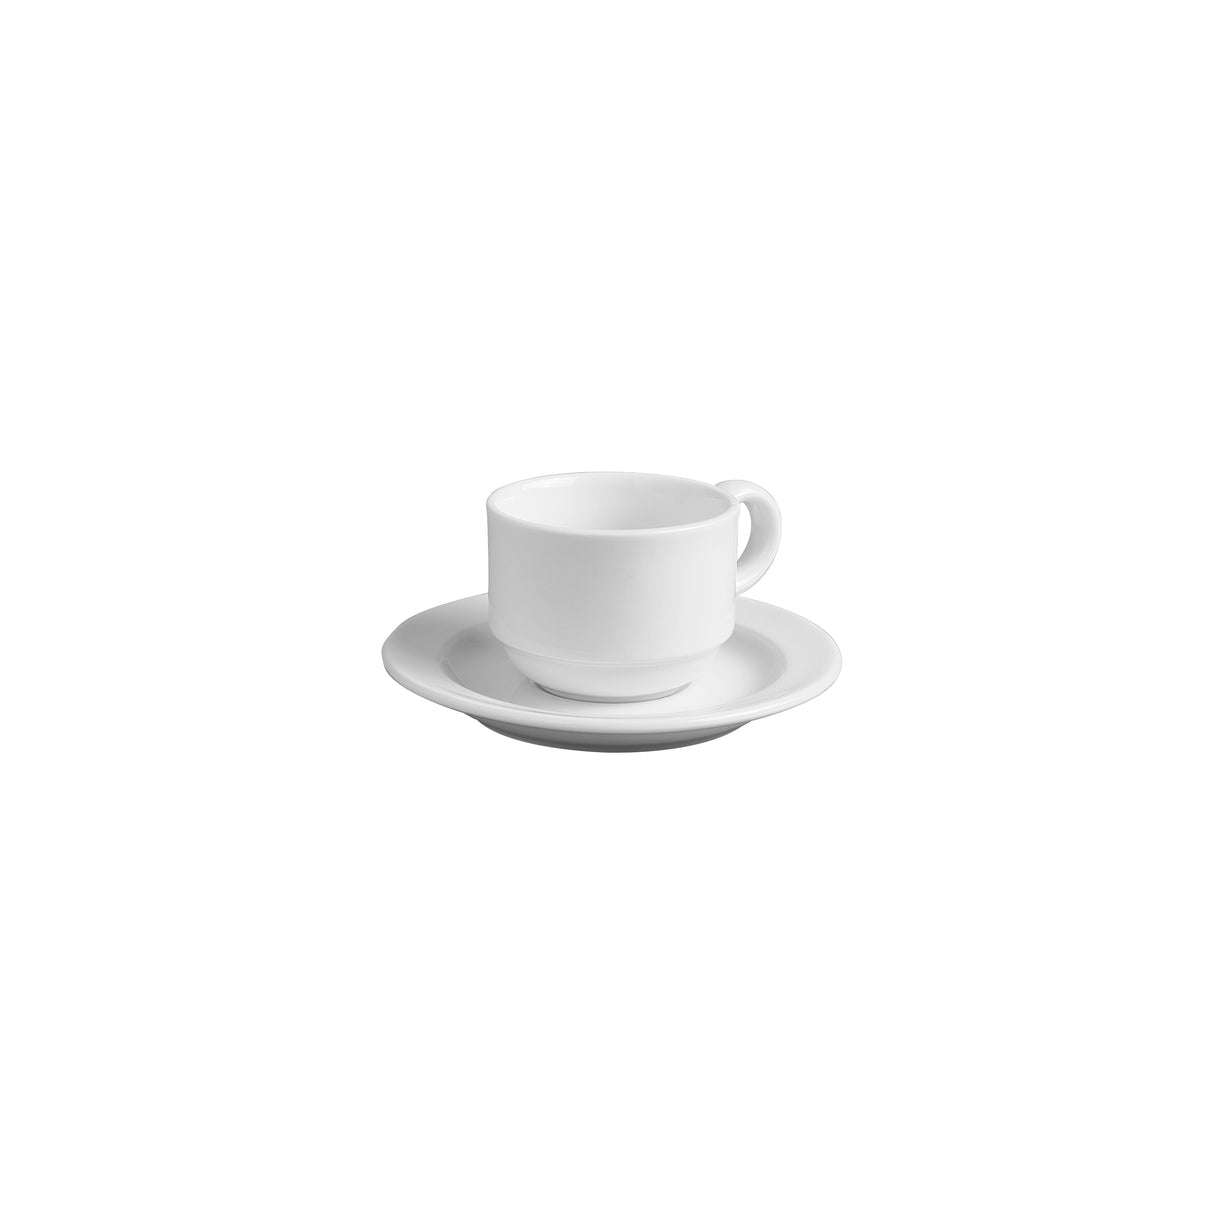 Tea Cup - 170Ml, Prelude: Pack of 24